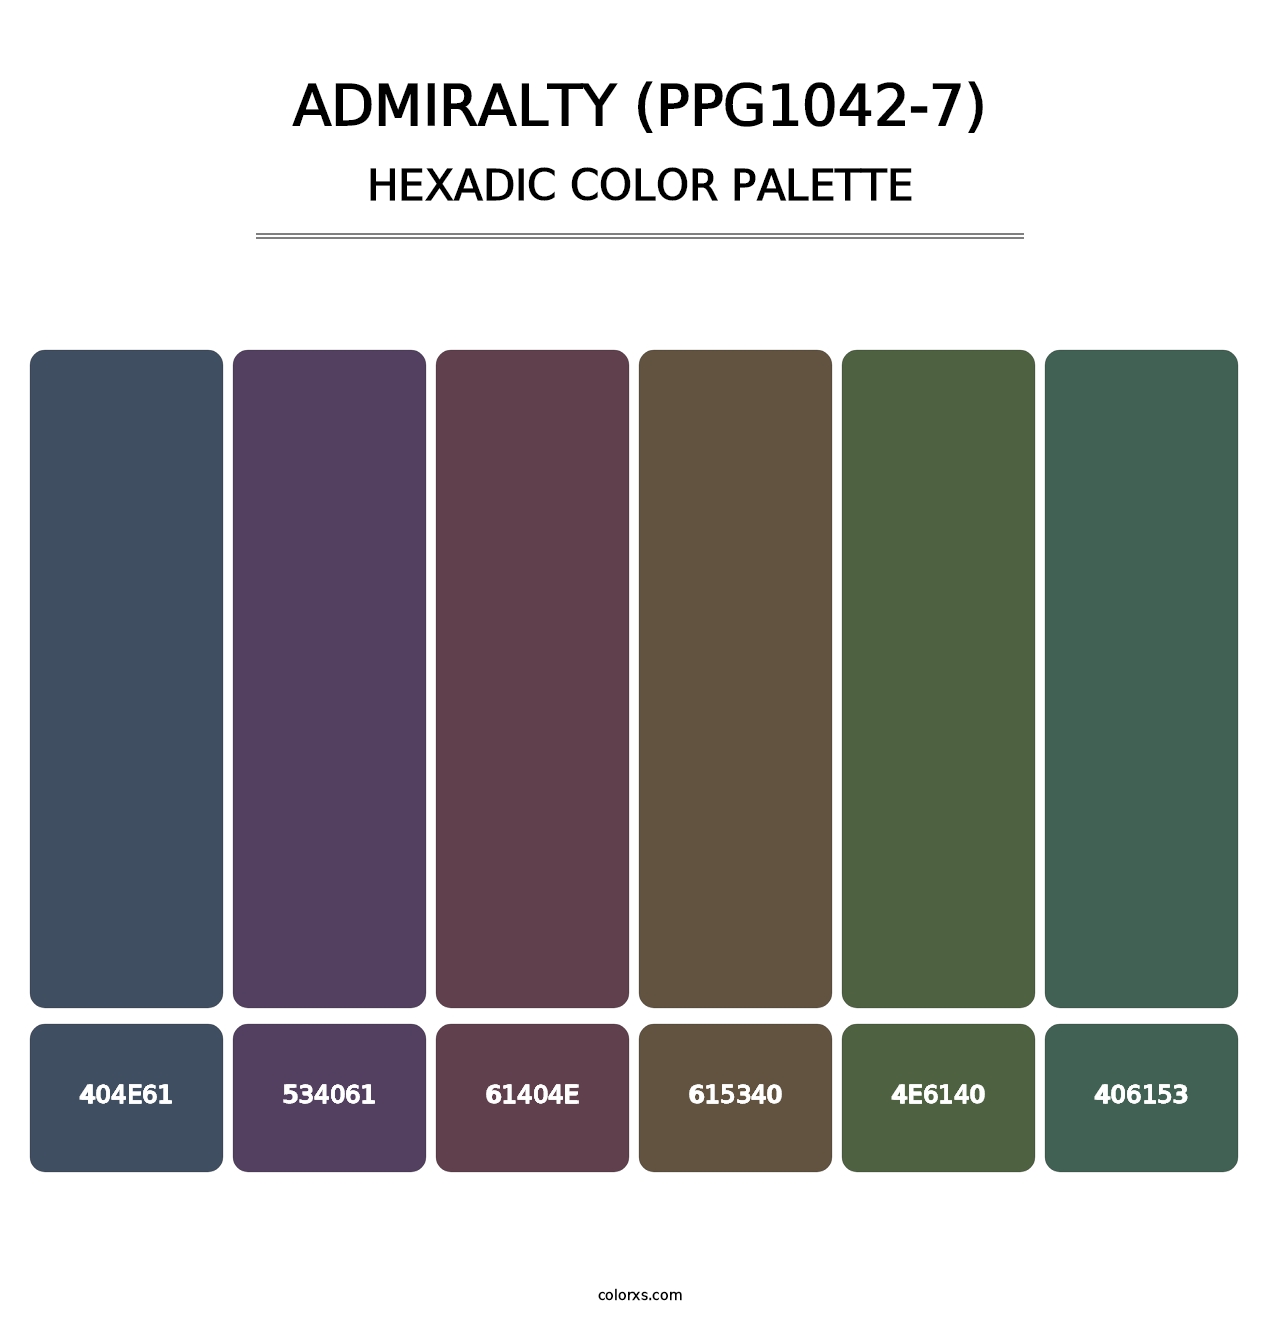 Admiralty (PPG1042-7) - Hexadic Color Palette